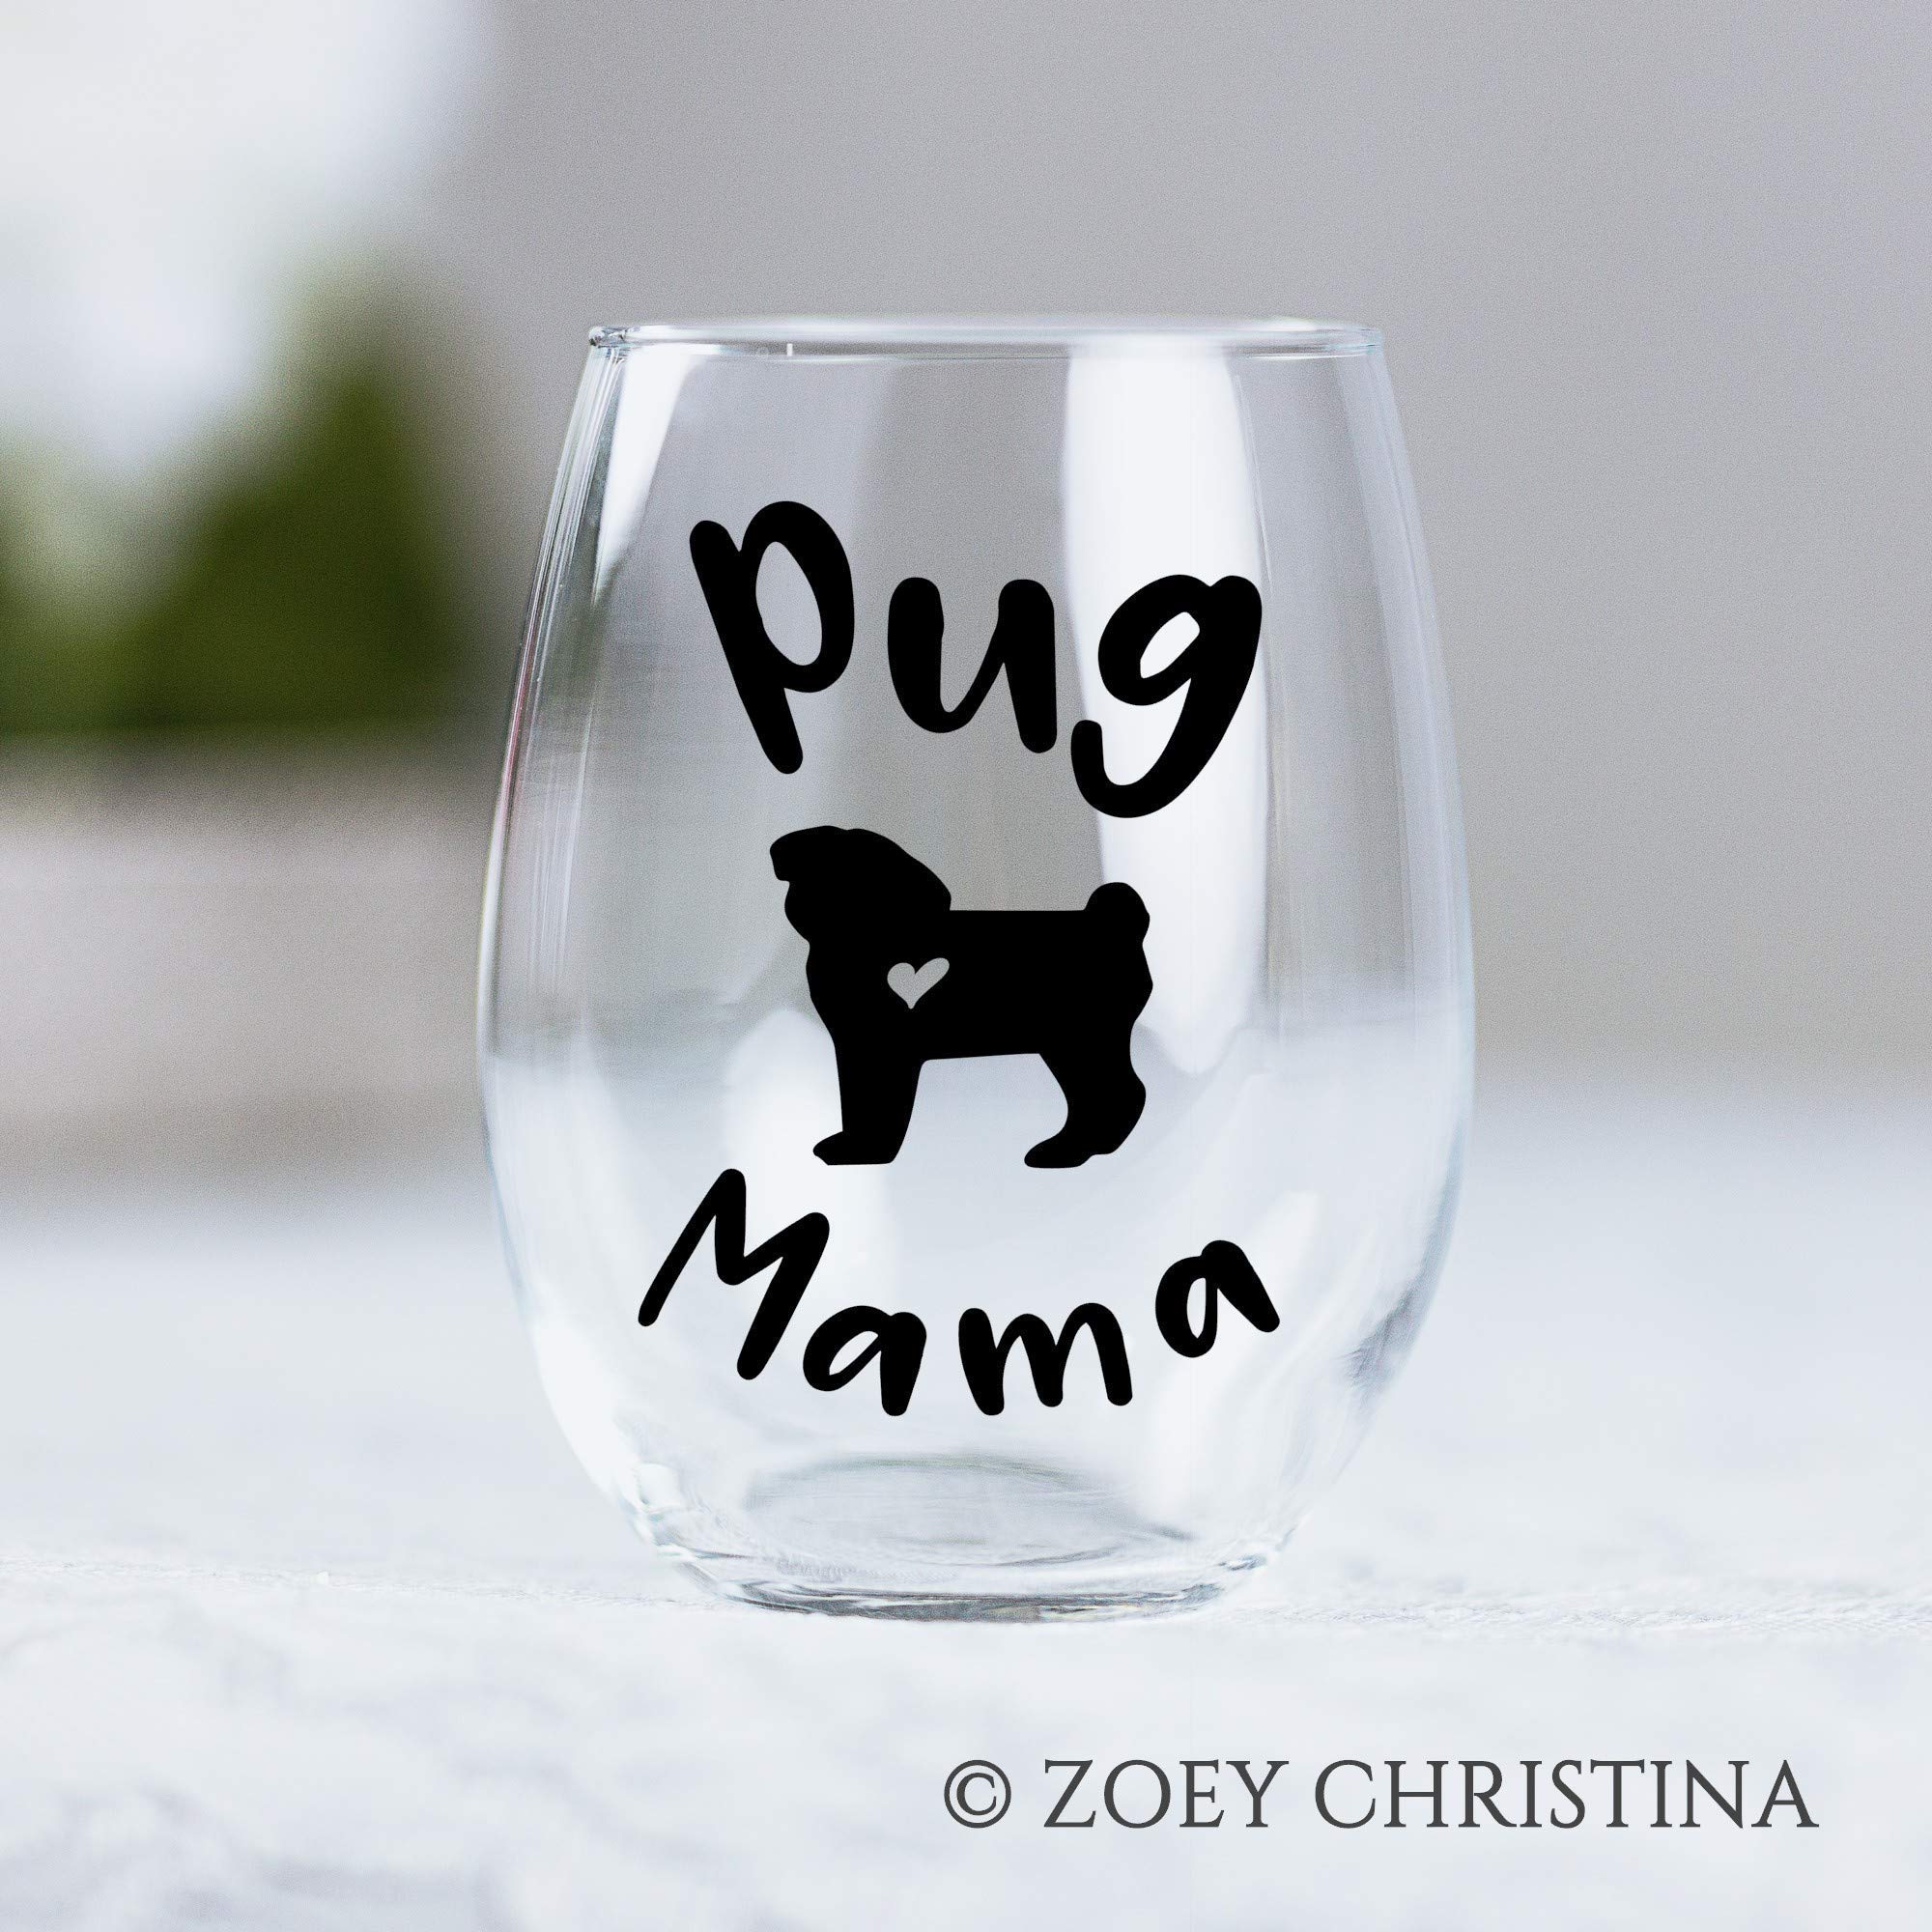 Funny Pug Dog Gifts for Women Pug Lovers Large Stemless Wine Glass for Her Dog Obsessed Pug Mama 0159